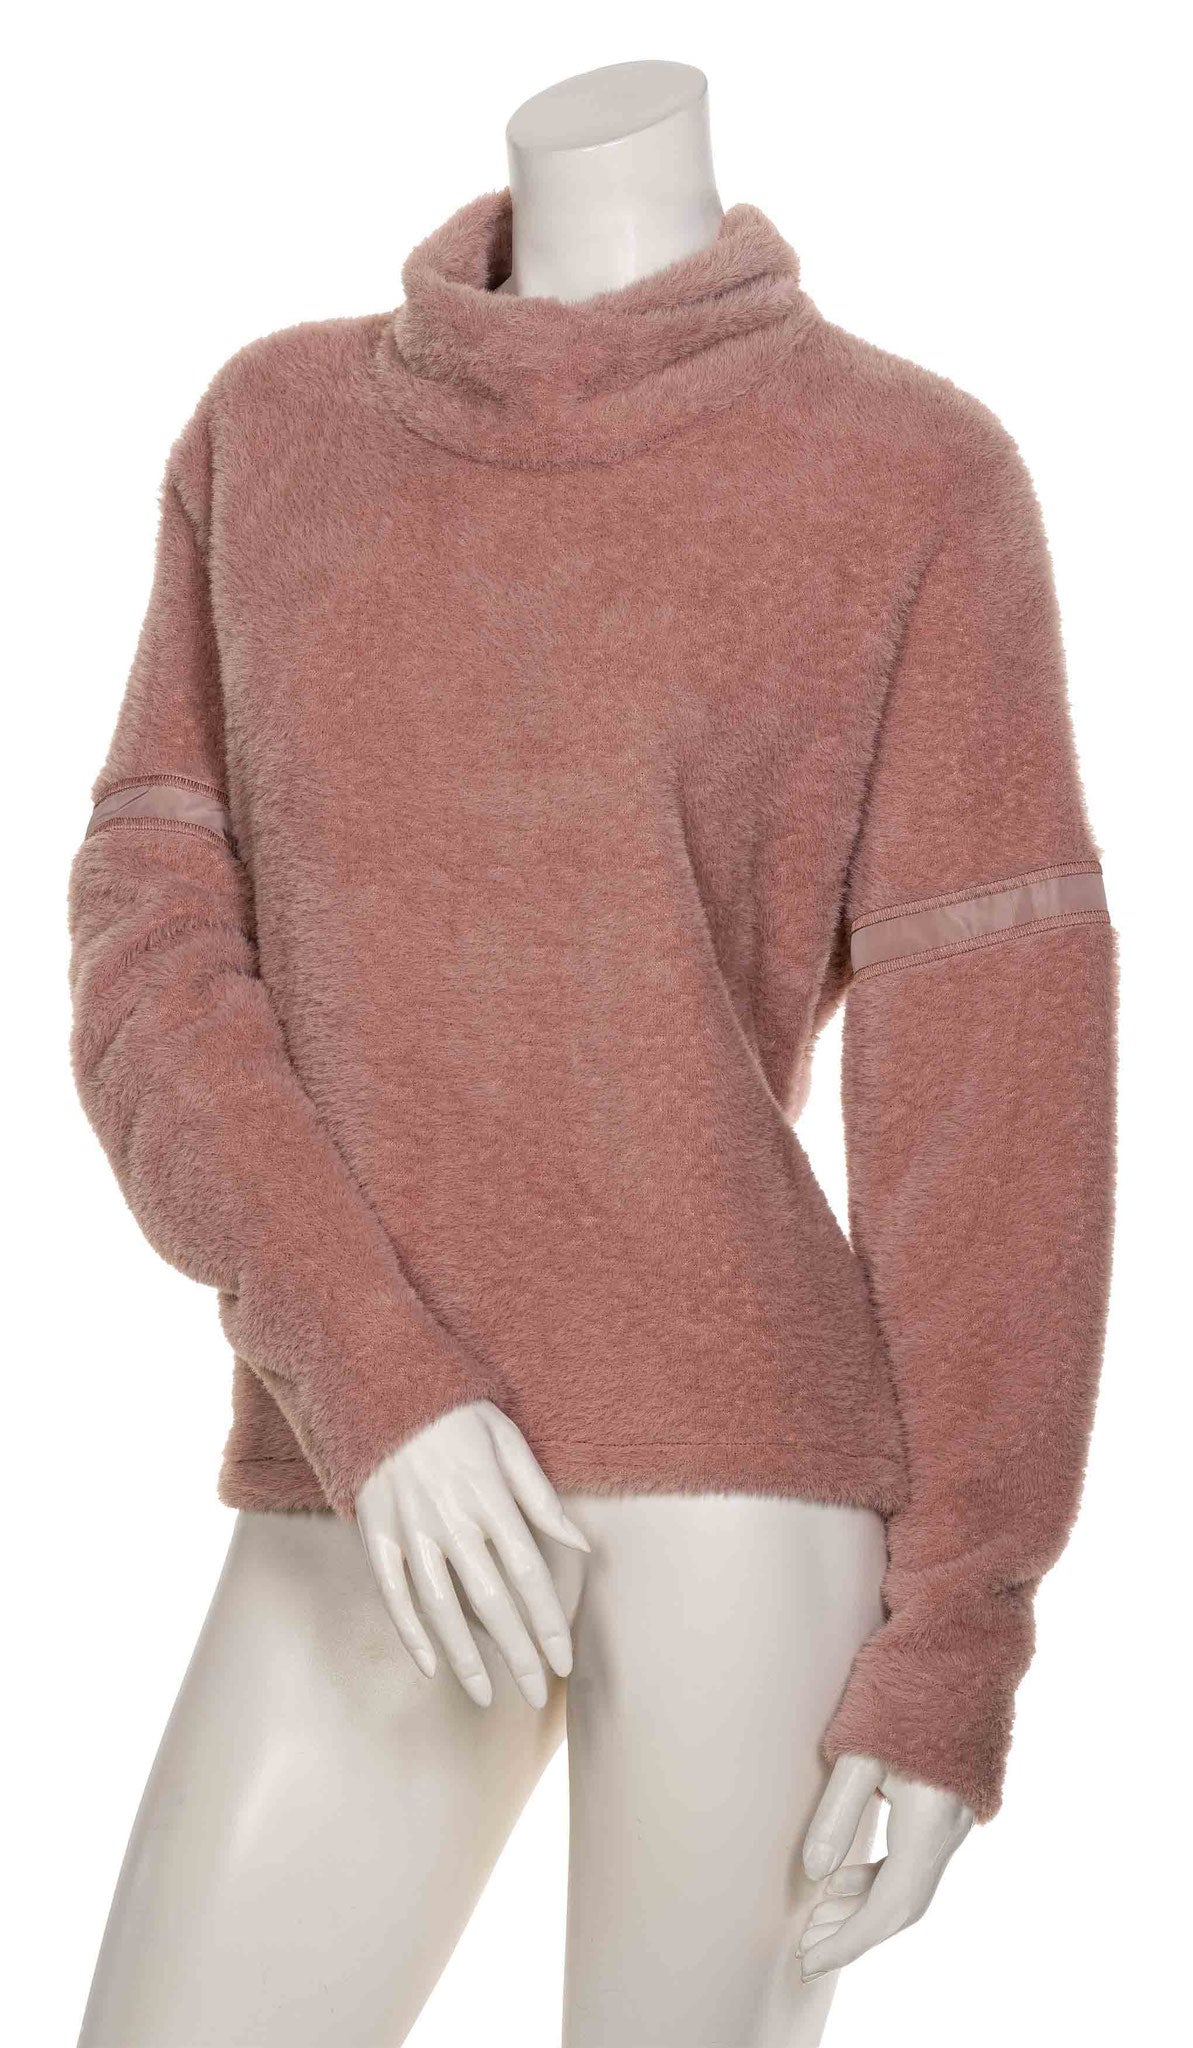 Front top half view of the beate heymann rosewoof fun fur pullover